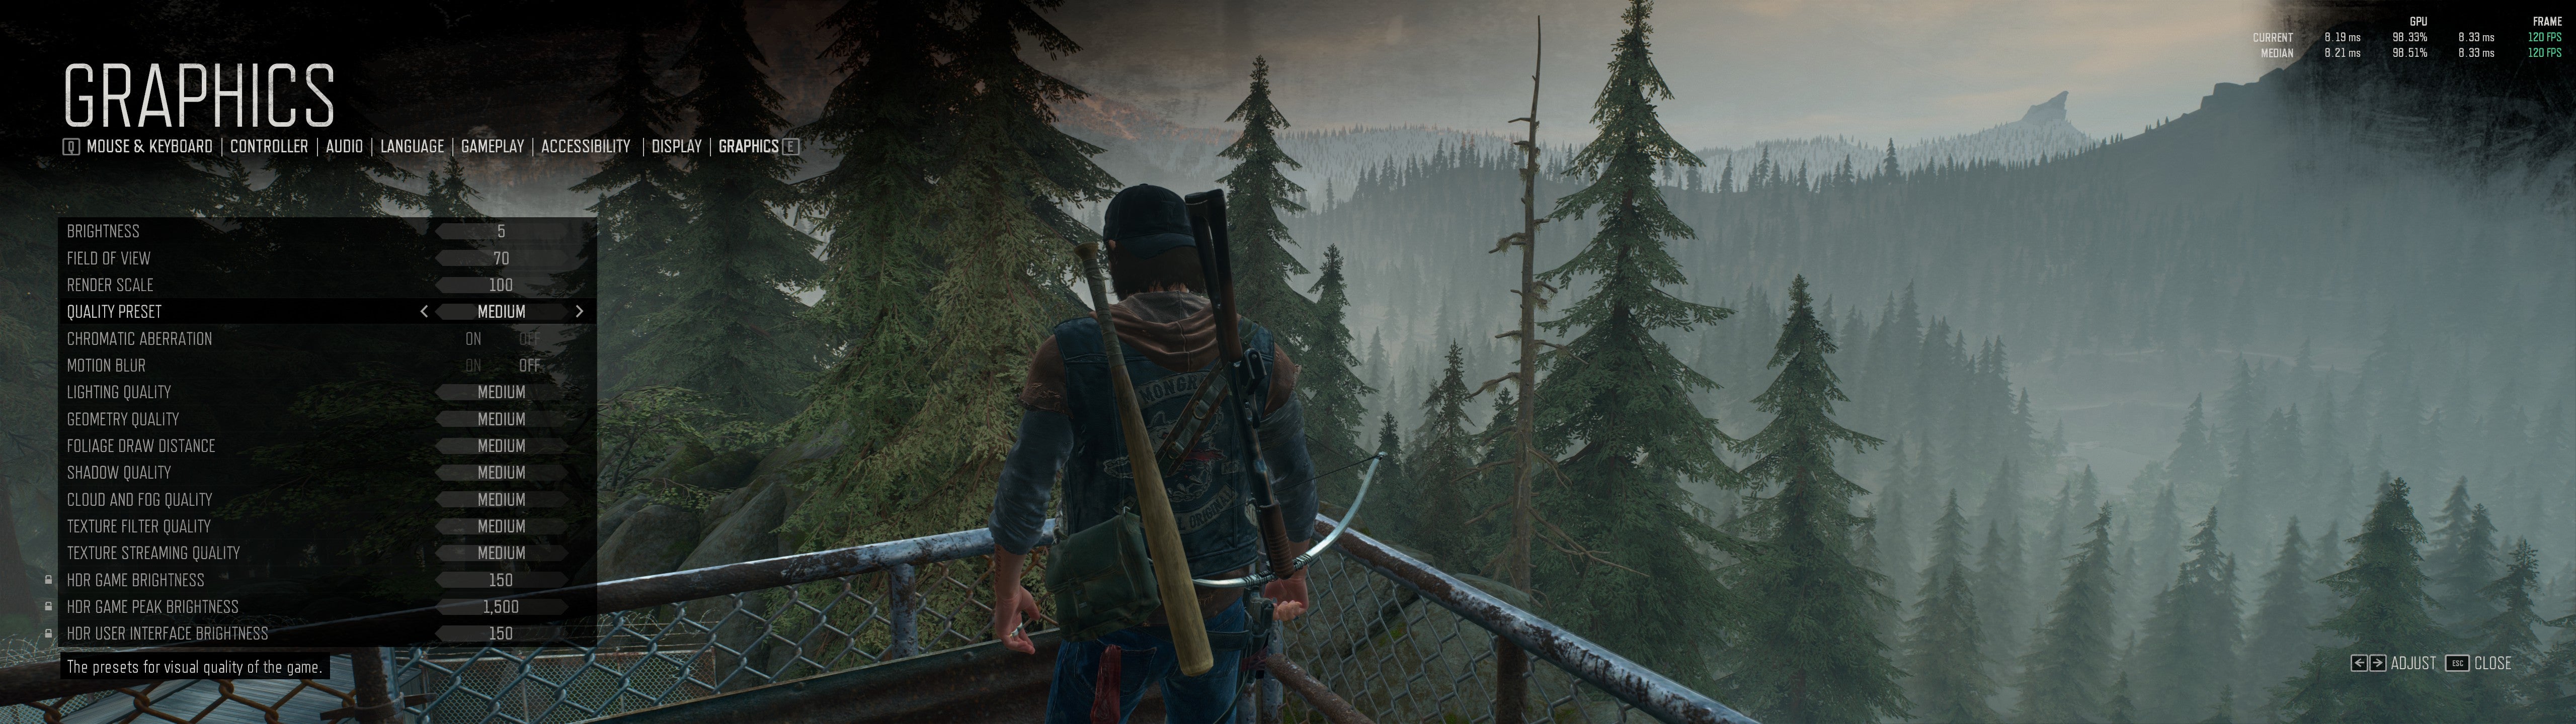 Days Gone's PC graphics menu showing the game using the Medium quality preset